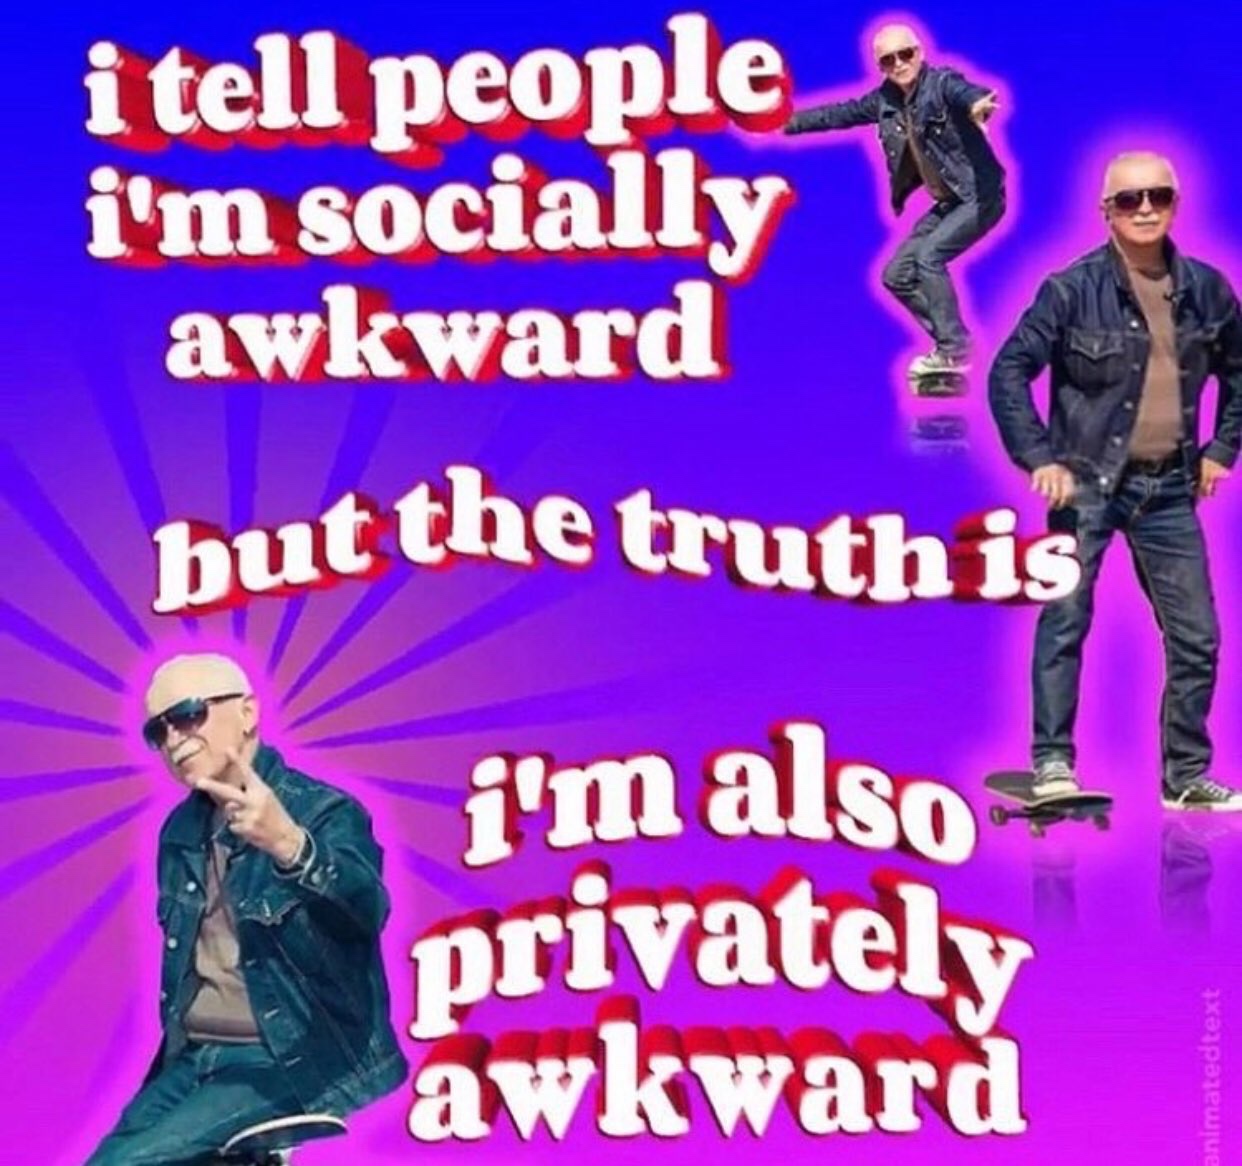 album cover - i tell people i'm socially awkward hut the truth is i'm also privately awkward animated text